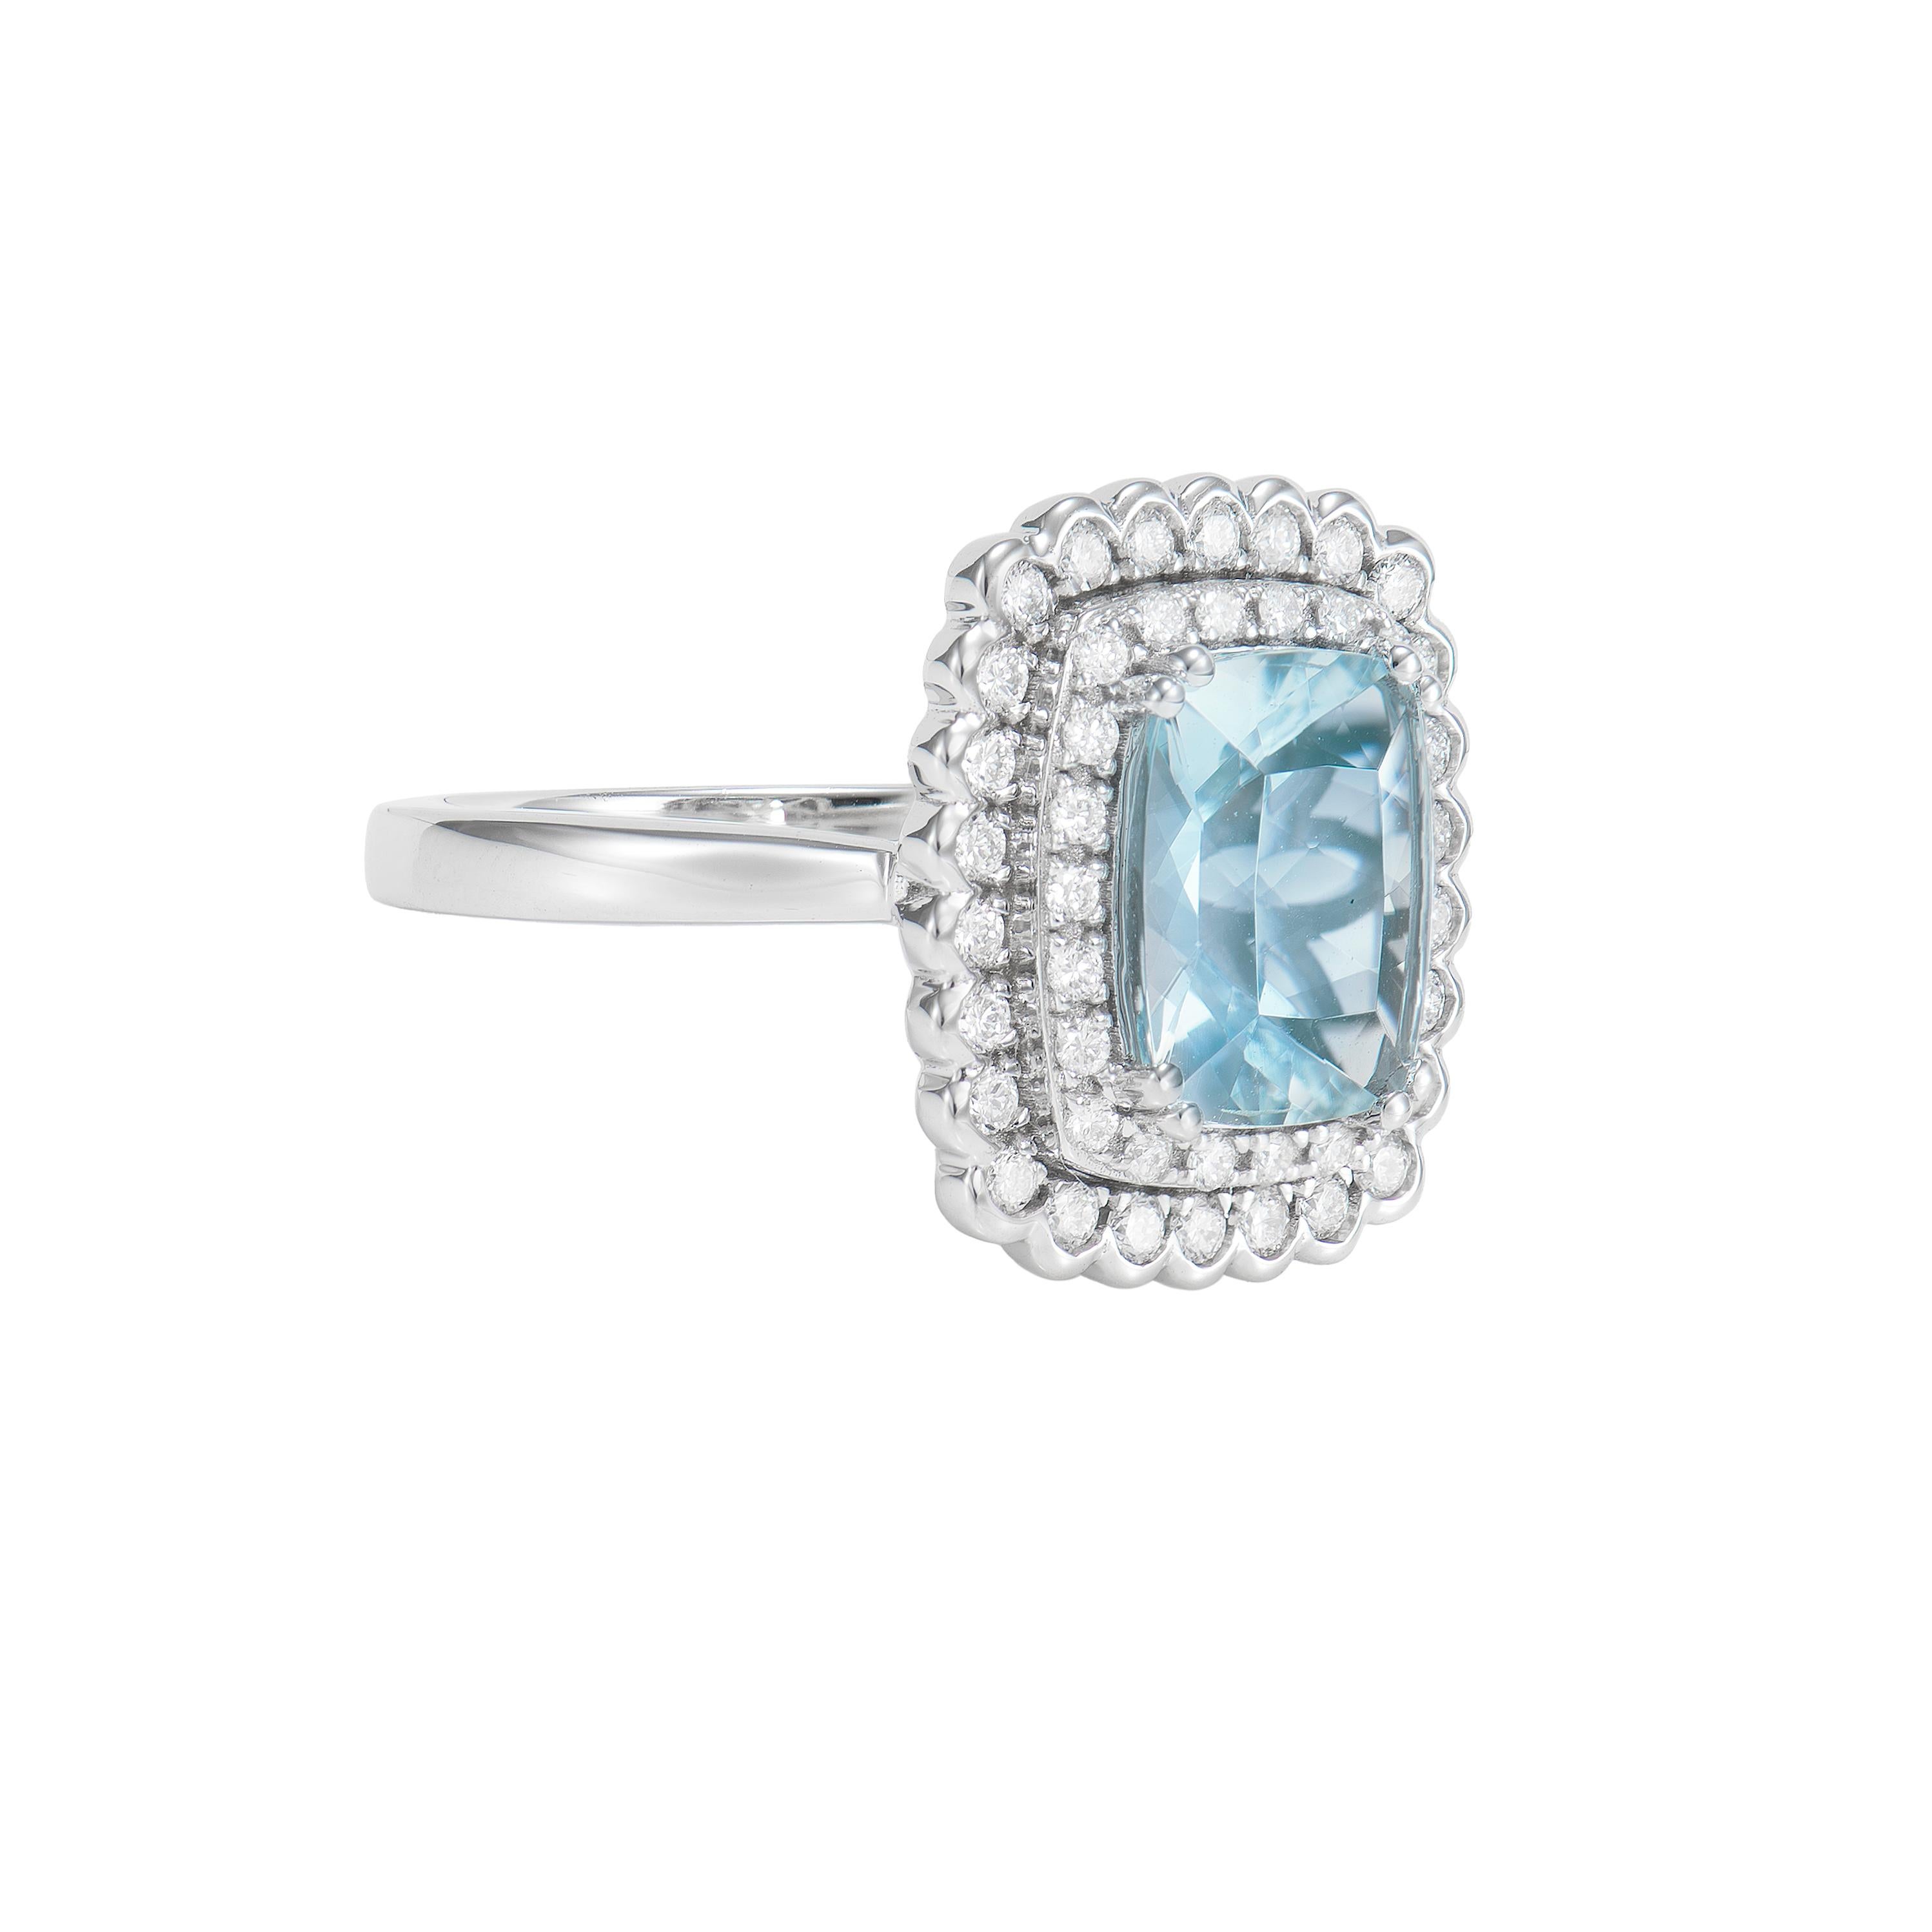 This collection features an array of aquamarines with an icy blue hue that is as cool as it gets! Accented with diamonds these rings are made in white gold and present a classic yet elegant look. 

Aquamarine and White Diamond Ring in 18 Karat White